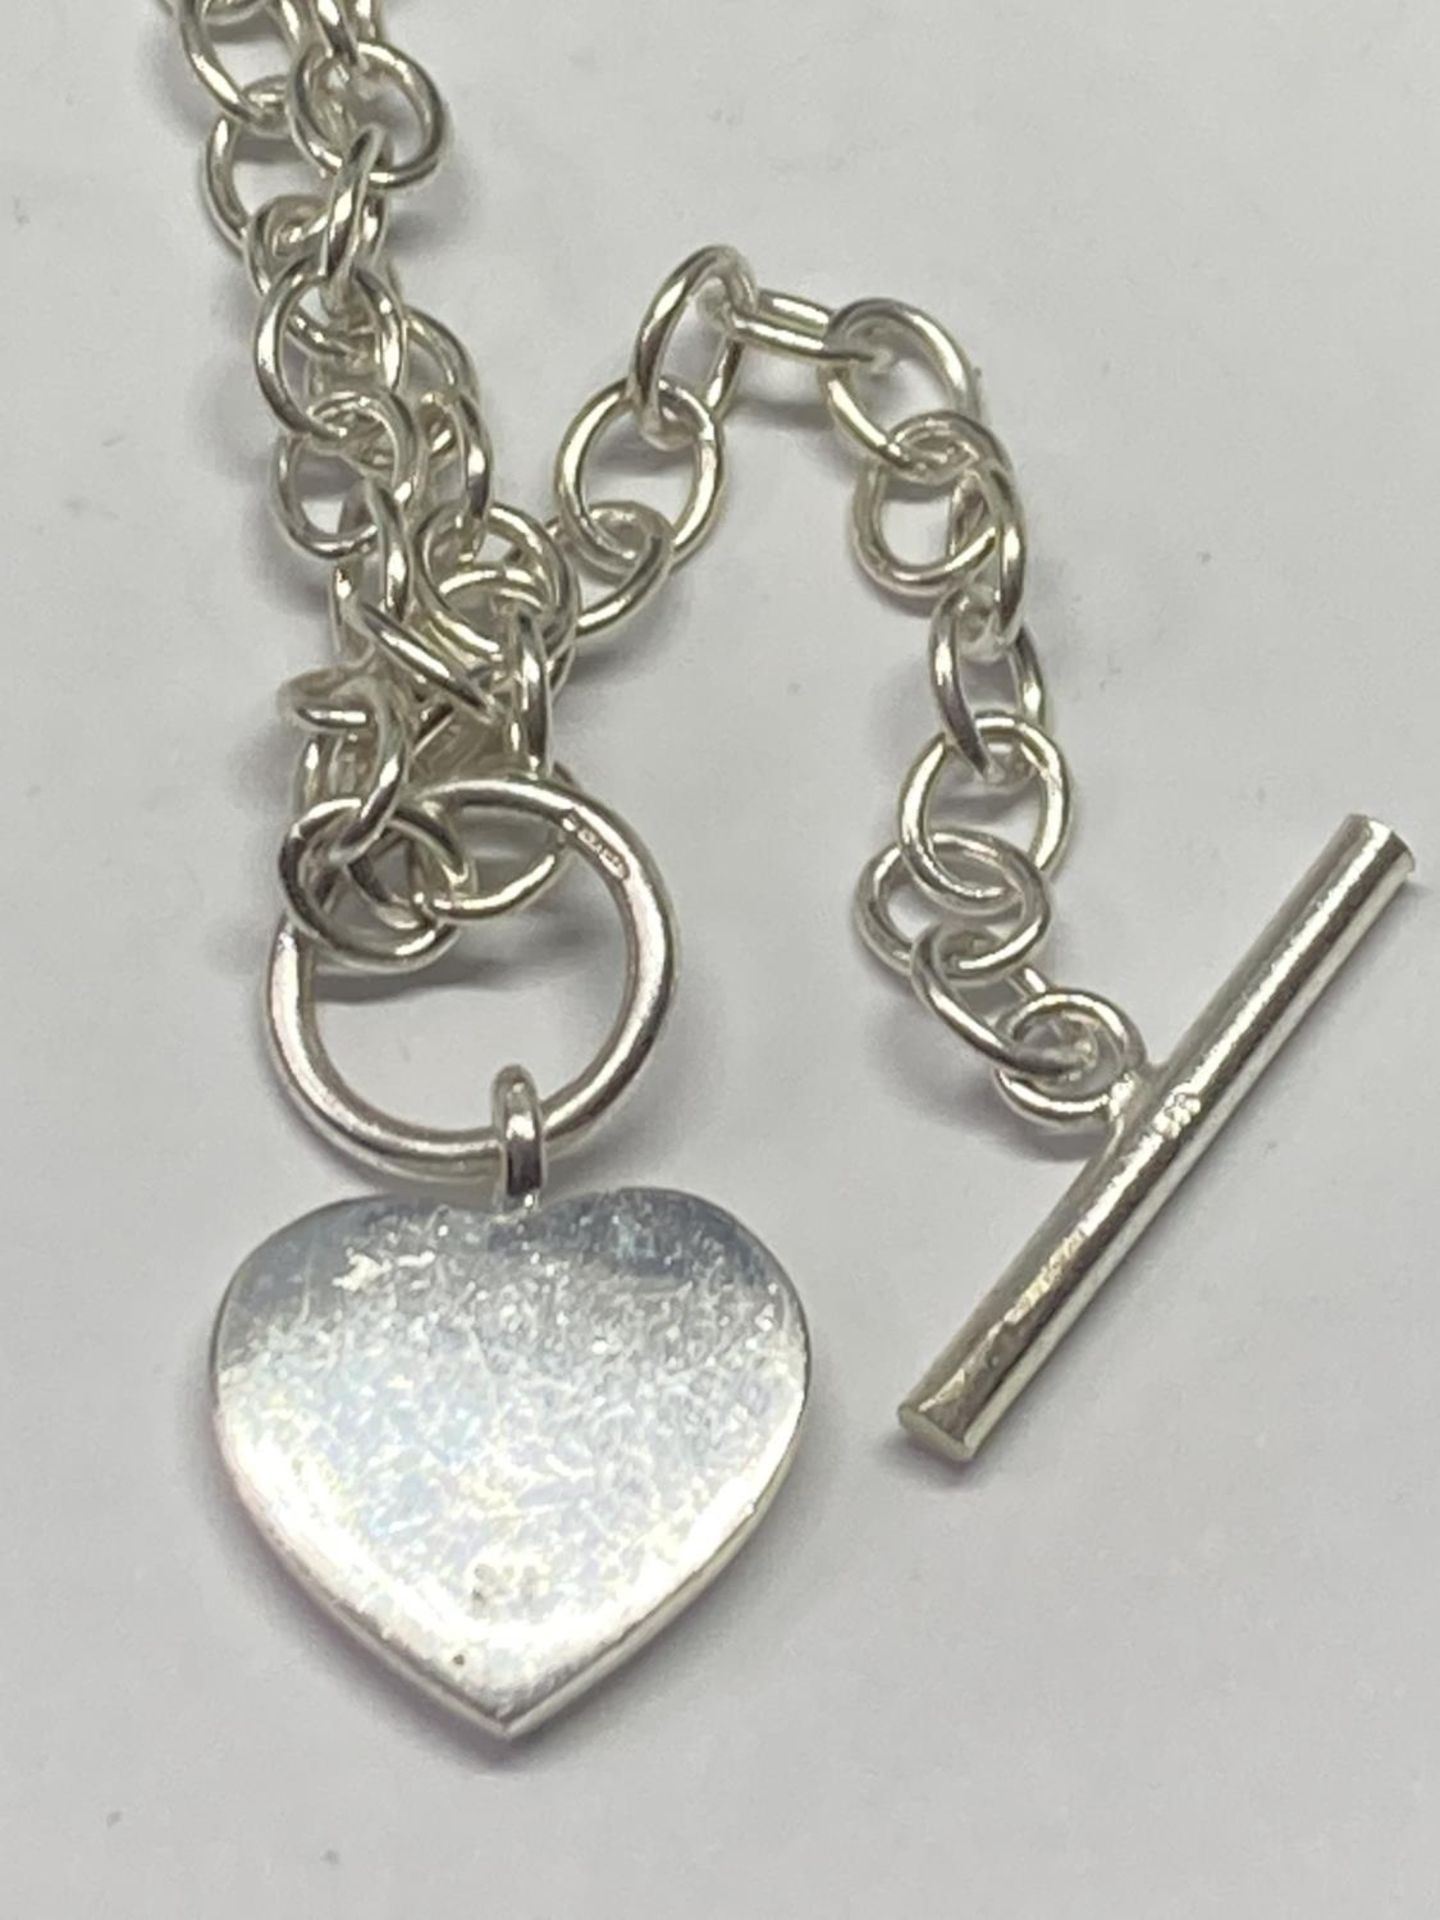 A SILVER T BAR NECKLACE WITH HEART CHARM LENGTH 18" - Image 3 of 3